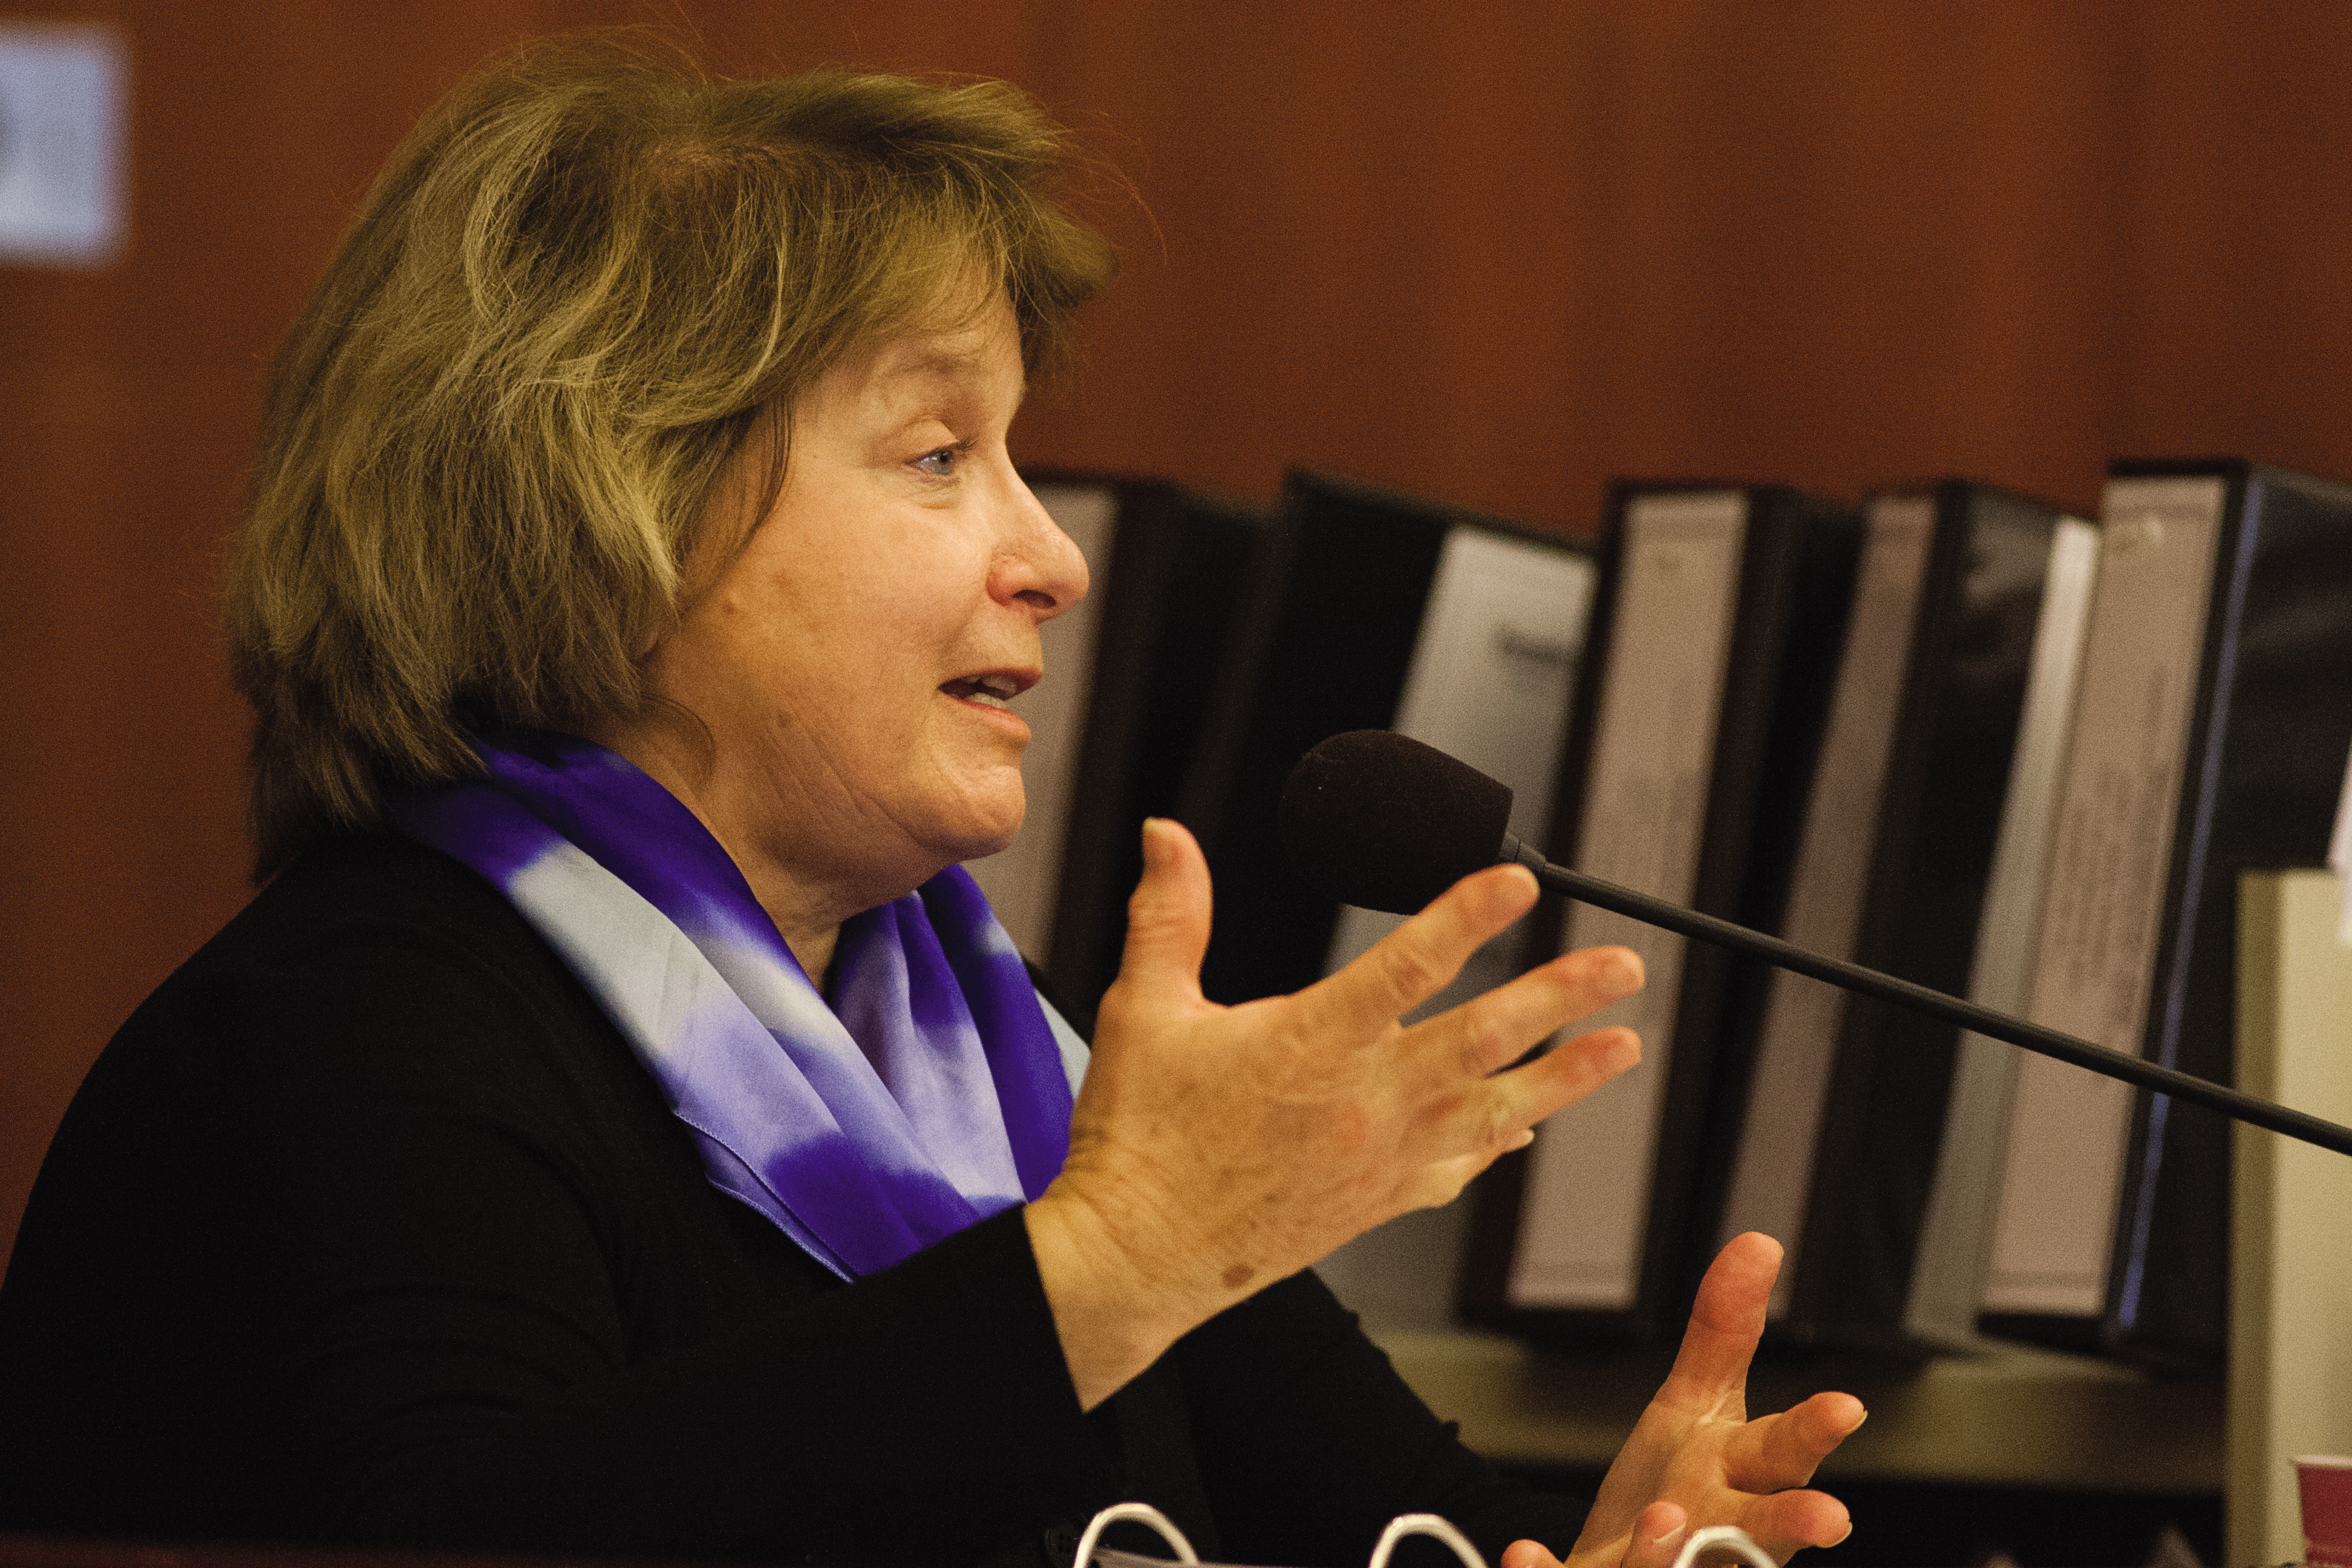 ACCJC President Barbara Beno takes the witness stand during Day 2 of the Superior Court Trial concerning City Collehge's accreditation on Tuesday, Oct. 28, 2014. (Photo by James Fanucchi)